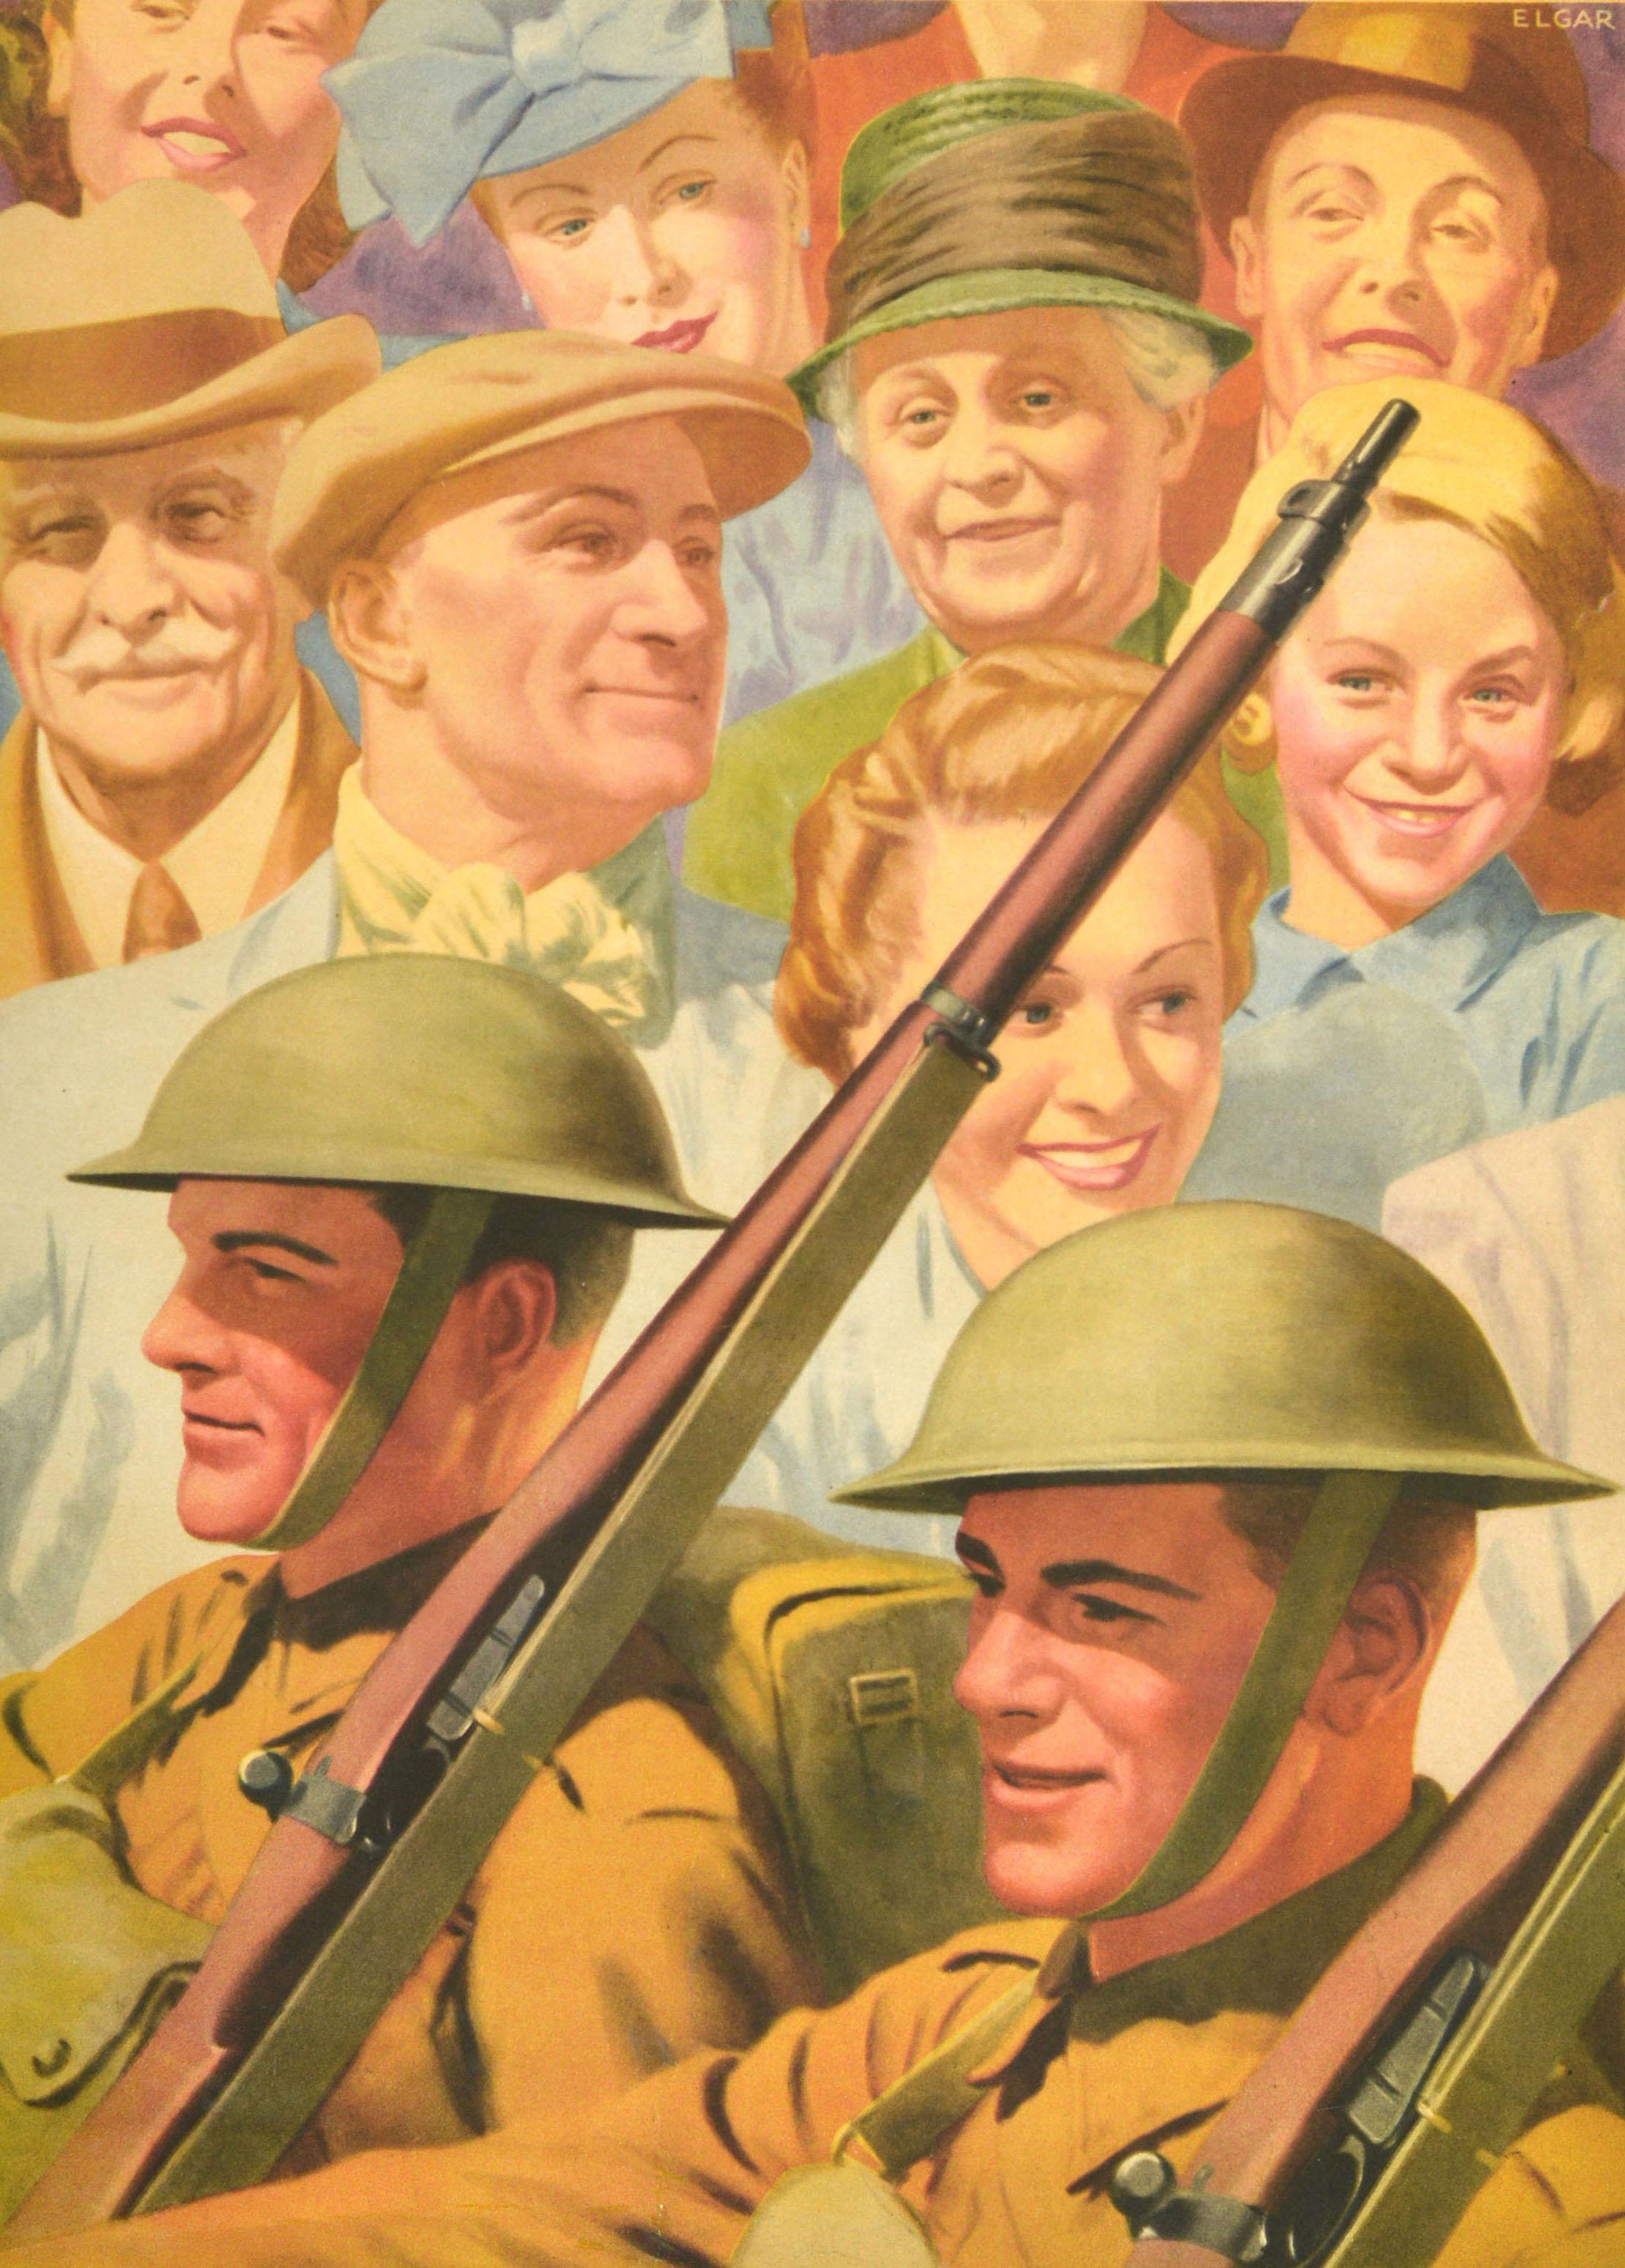 Original vintage World War Two National Savings home front poster - Keep on Saving Salute the Soldier - featuring an image of soldiers in uniform marching with rifle guns on their shoulders in front of a crowd of smiling people supporting them, the